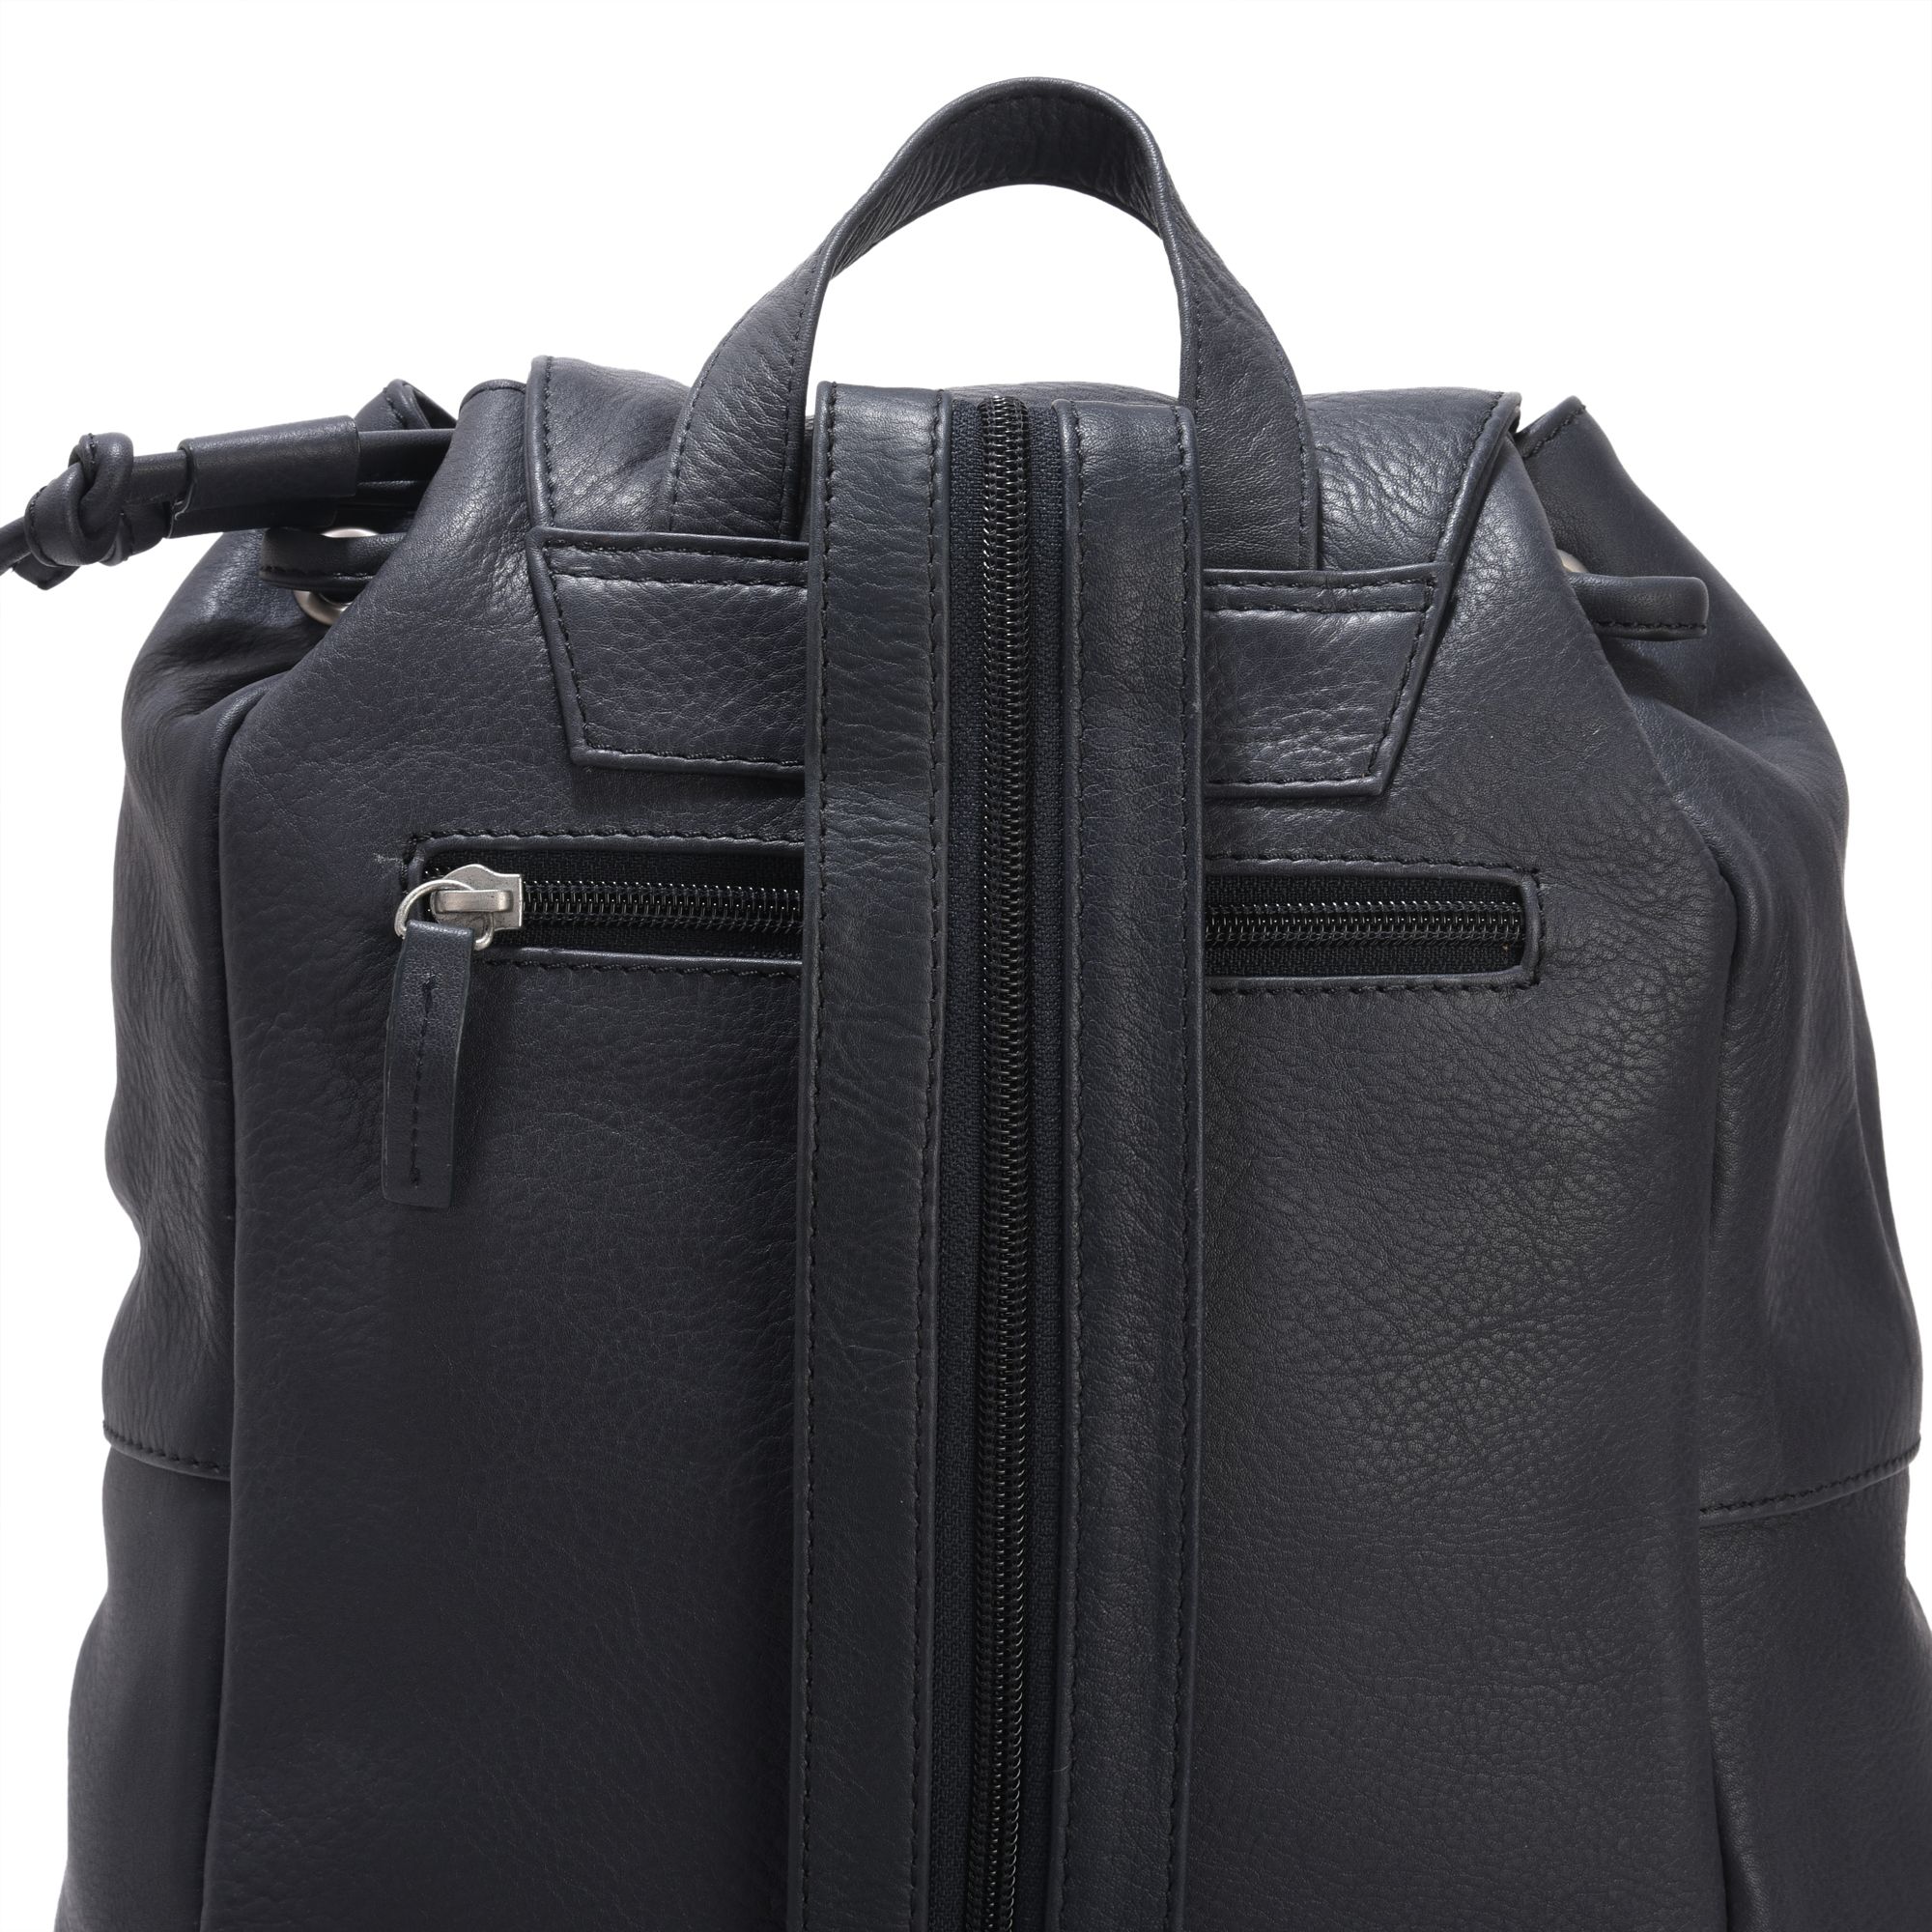 Navy leather backpack for women